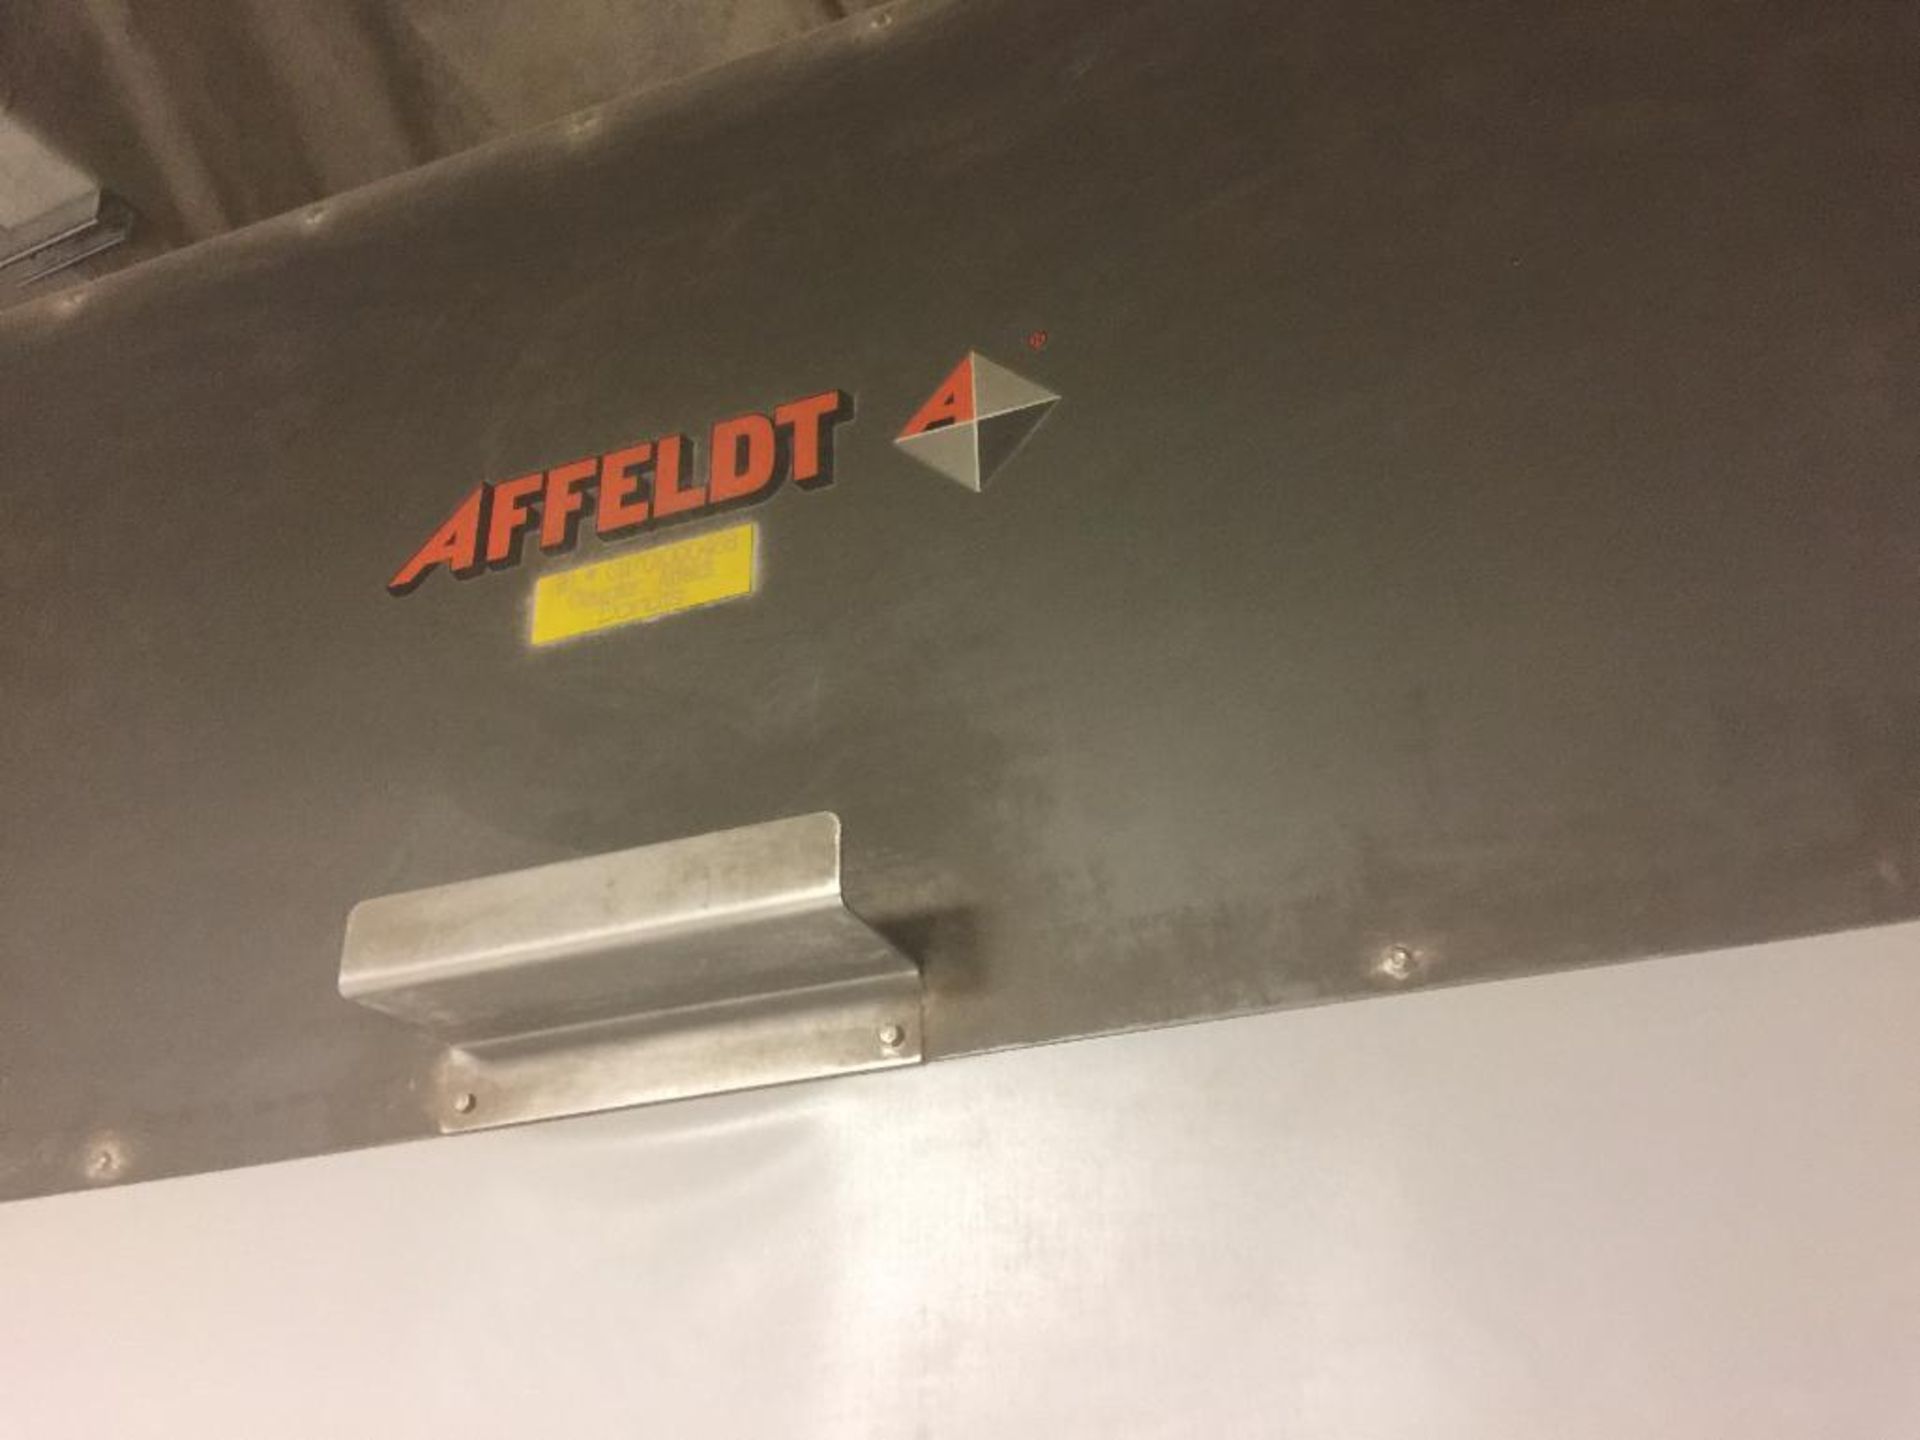 Affeldt product counter {Located in Lodi, CA} - Image 2 of 7